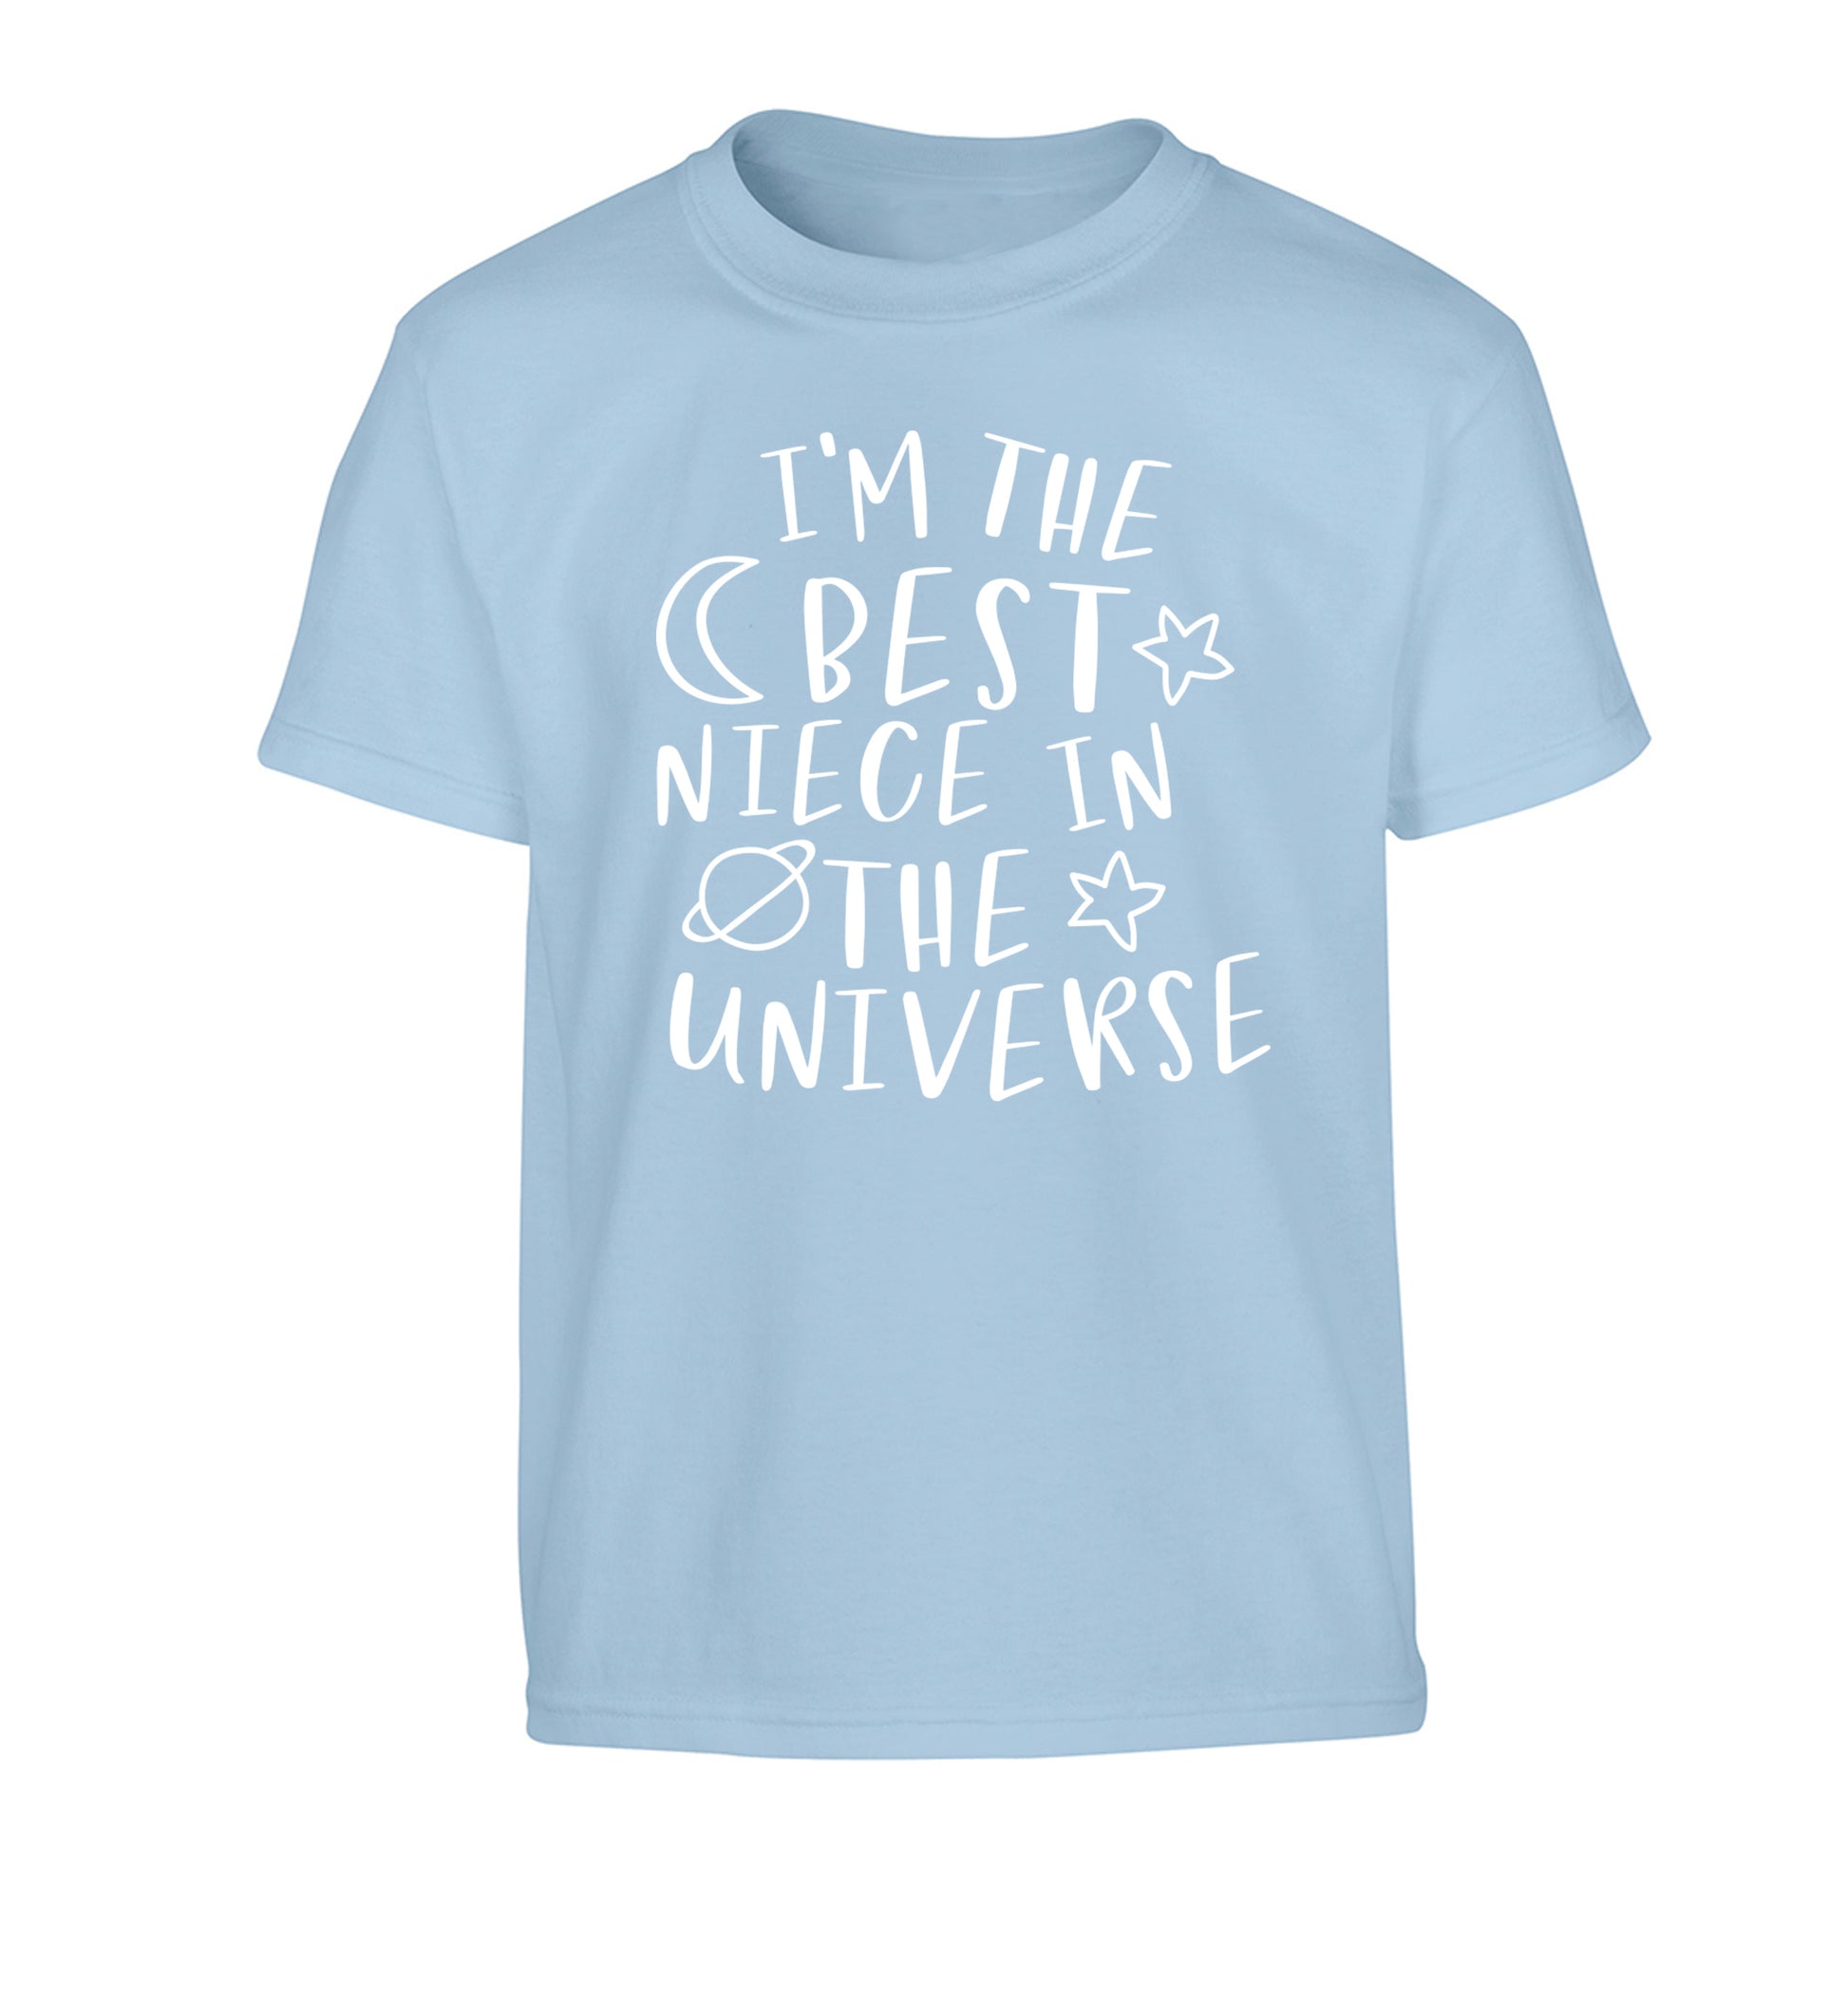 I'm the best niece in the universe Children's light blue Tshirt 12-13 Years